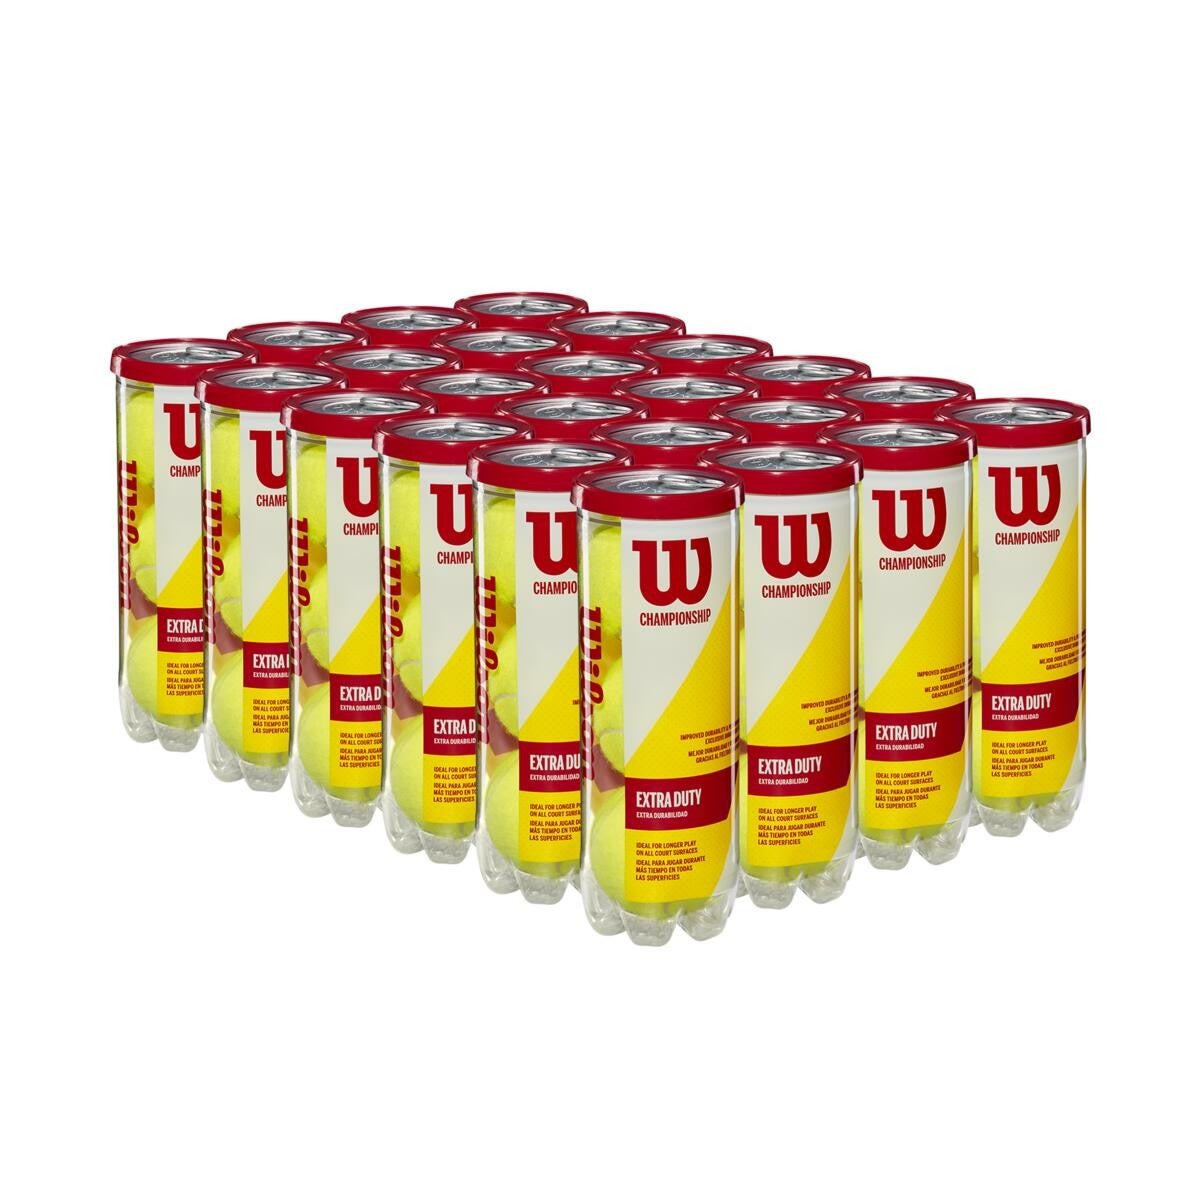 Wilson Championship Extra Duty Tennis Ball 24 Cans